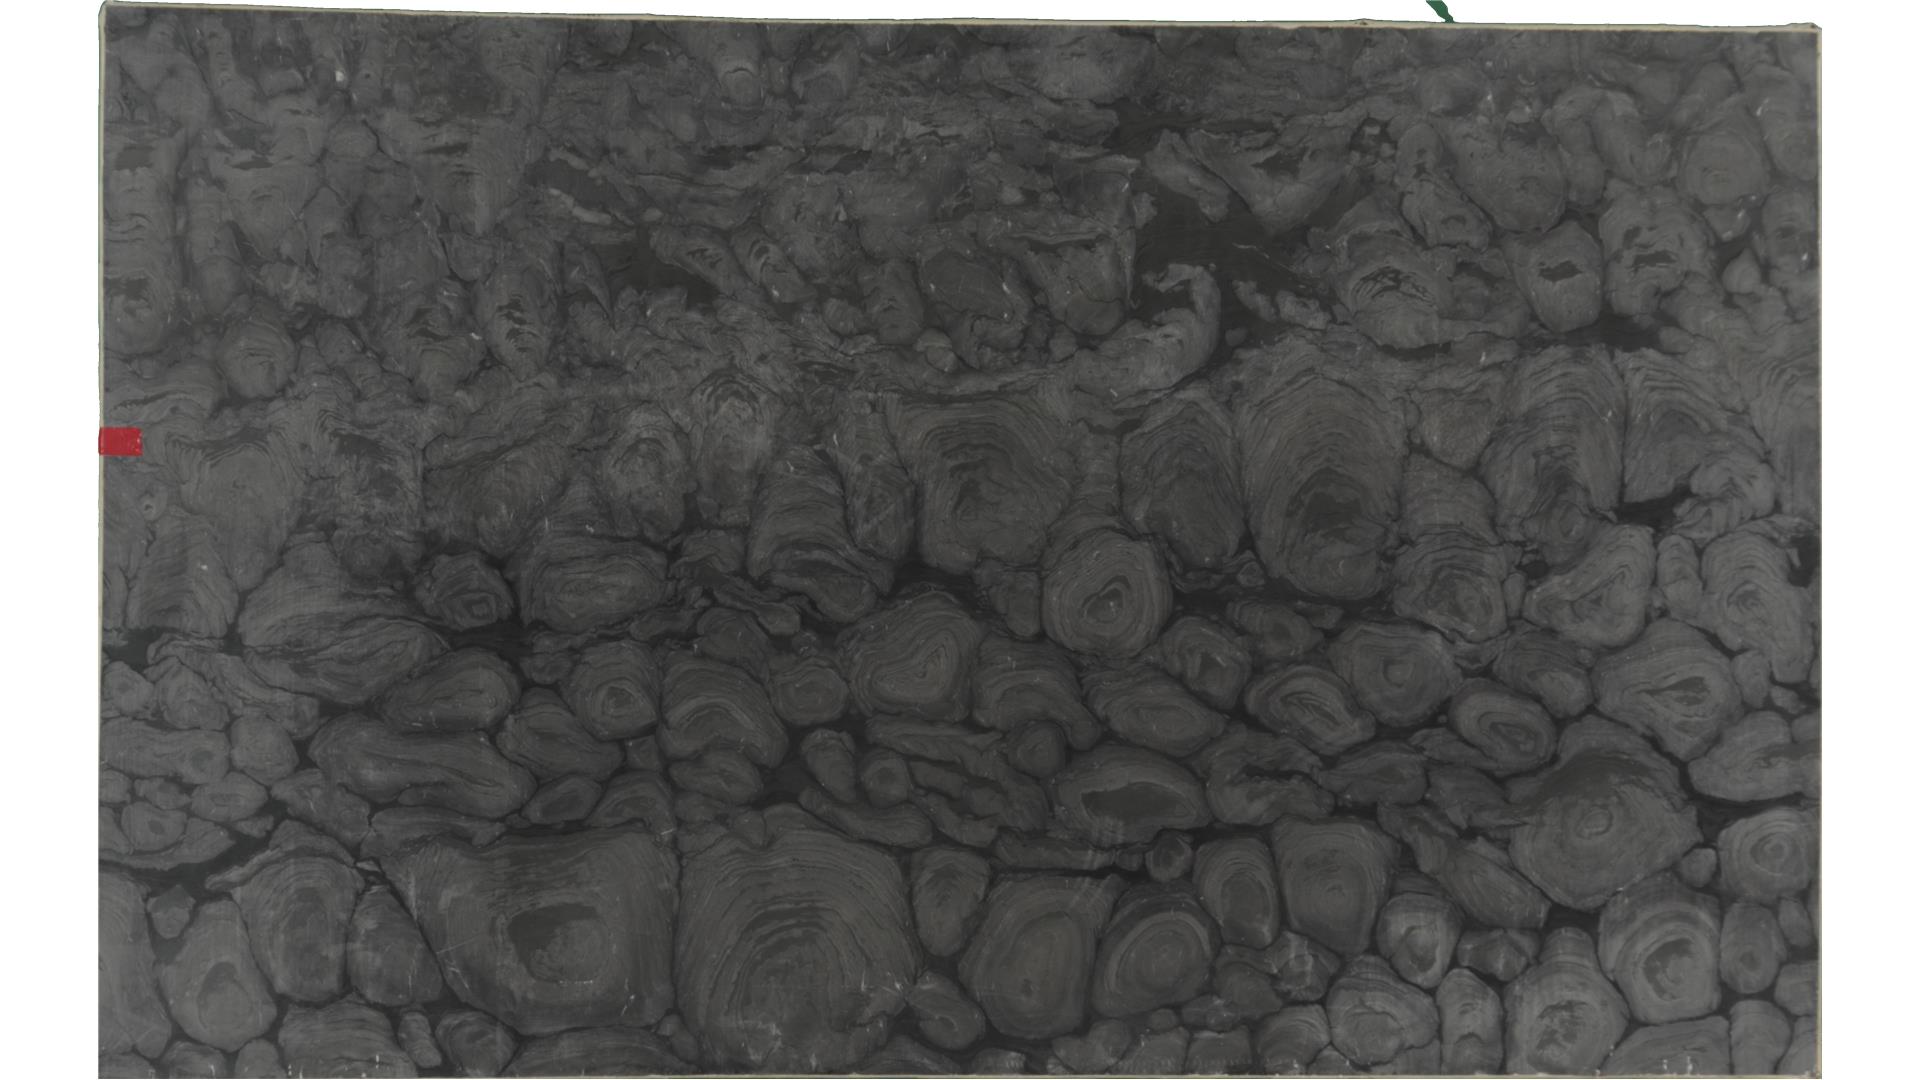 Nocturn Black Leathered Marble Slabs